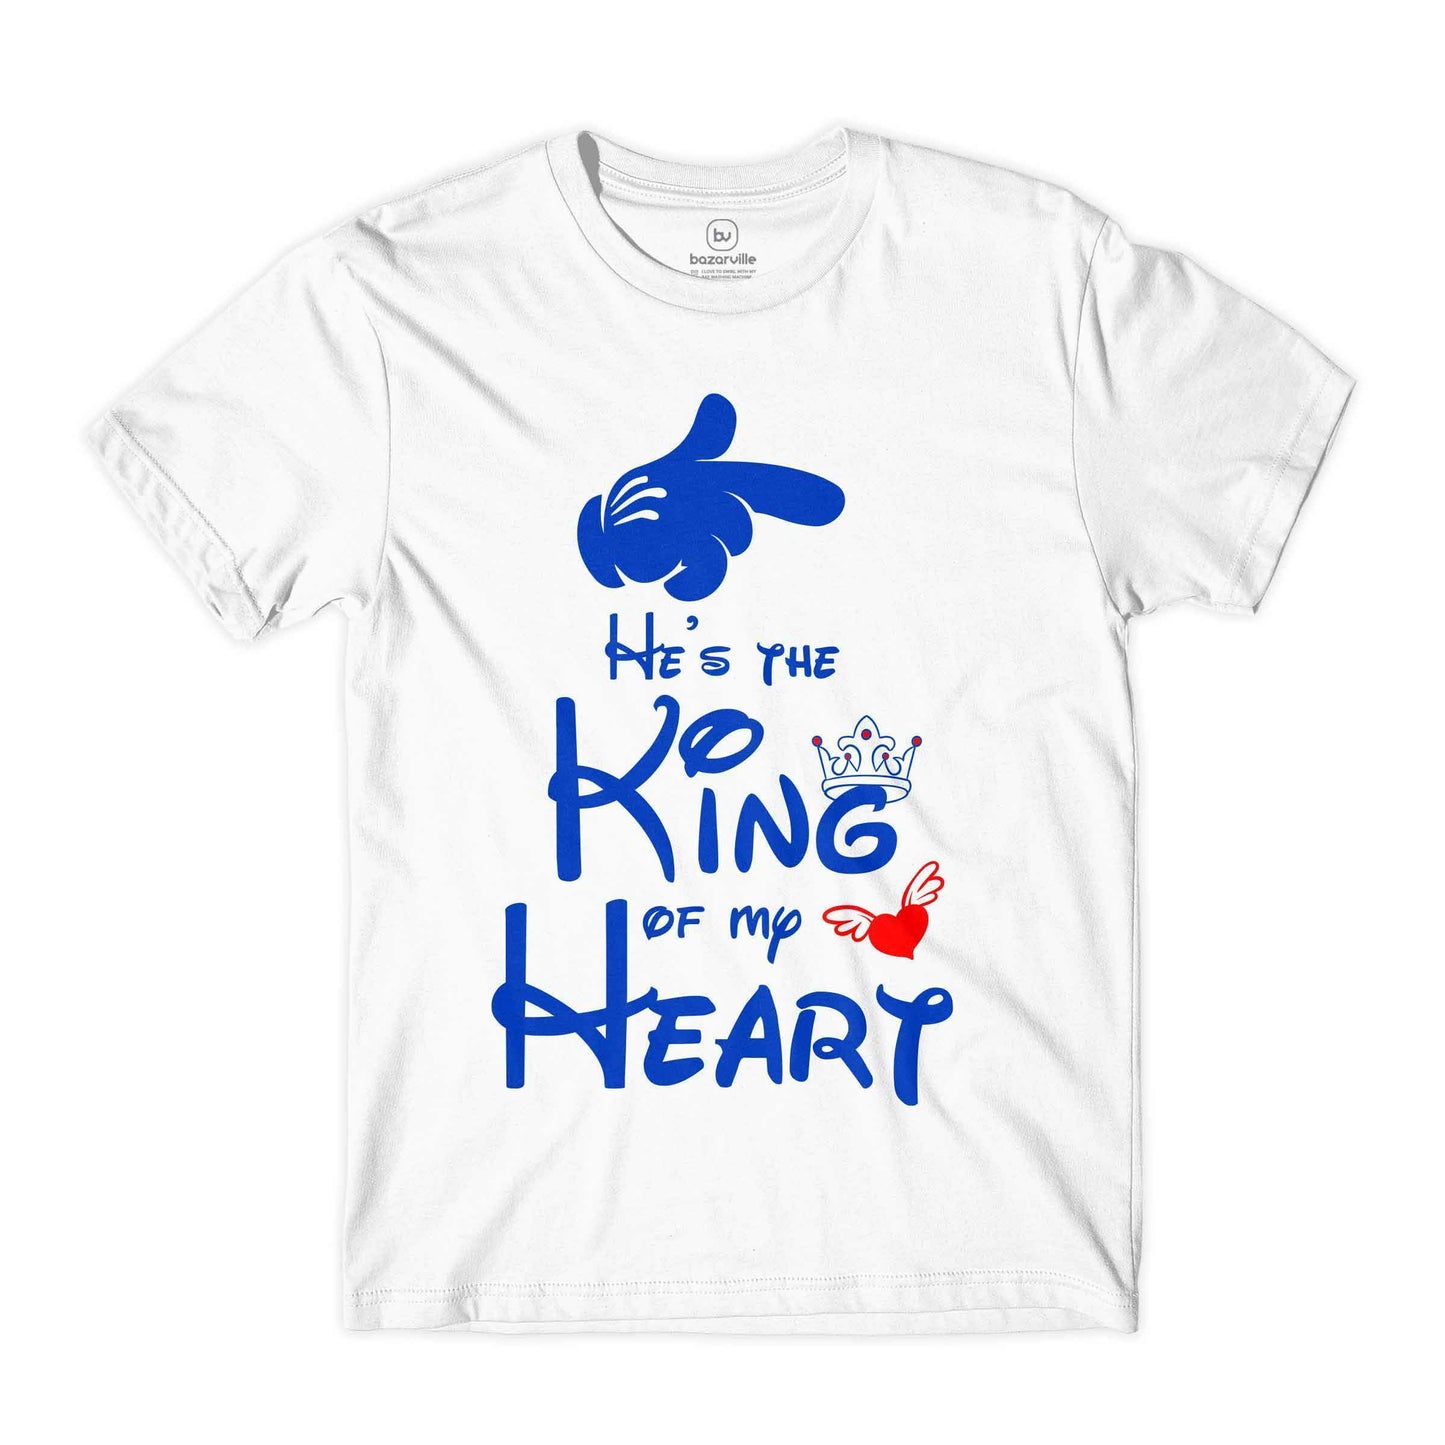 Bazarville Couple Design White / WOMEN / XS King Queen Of My Heart - Couple Tee